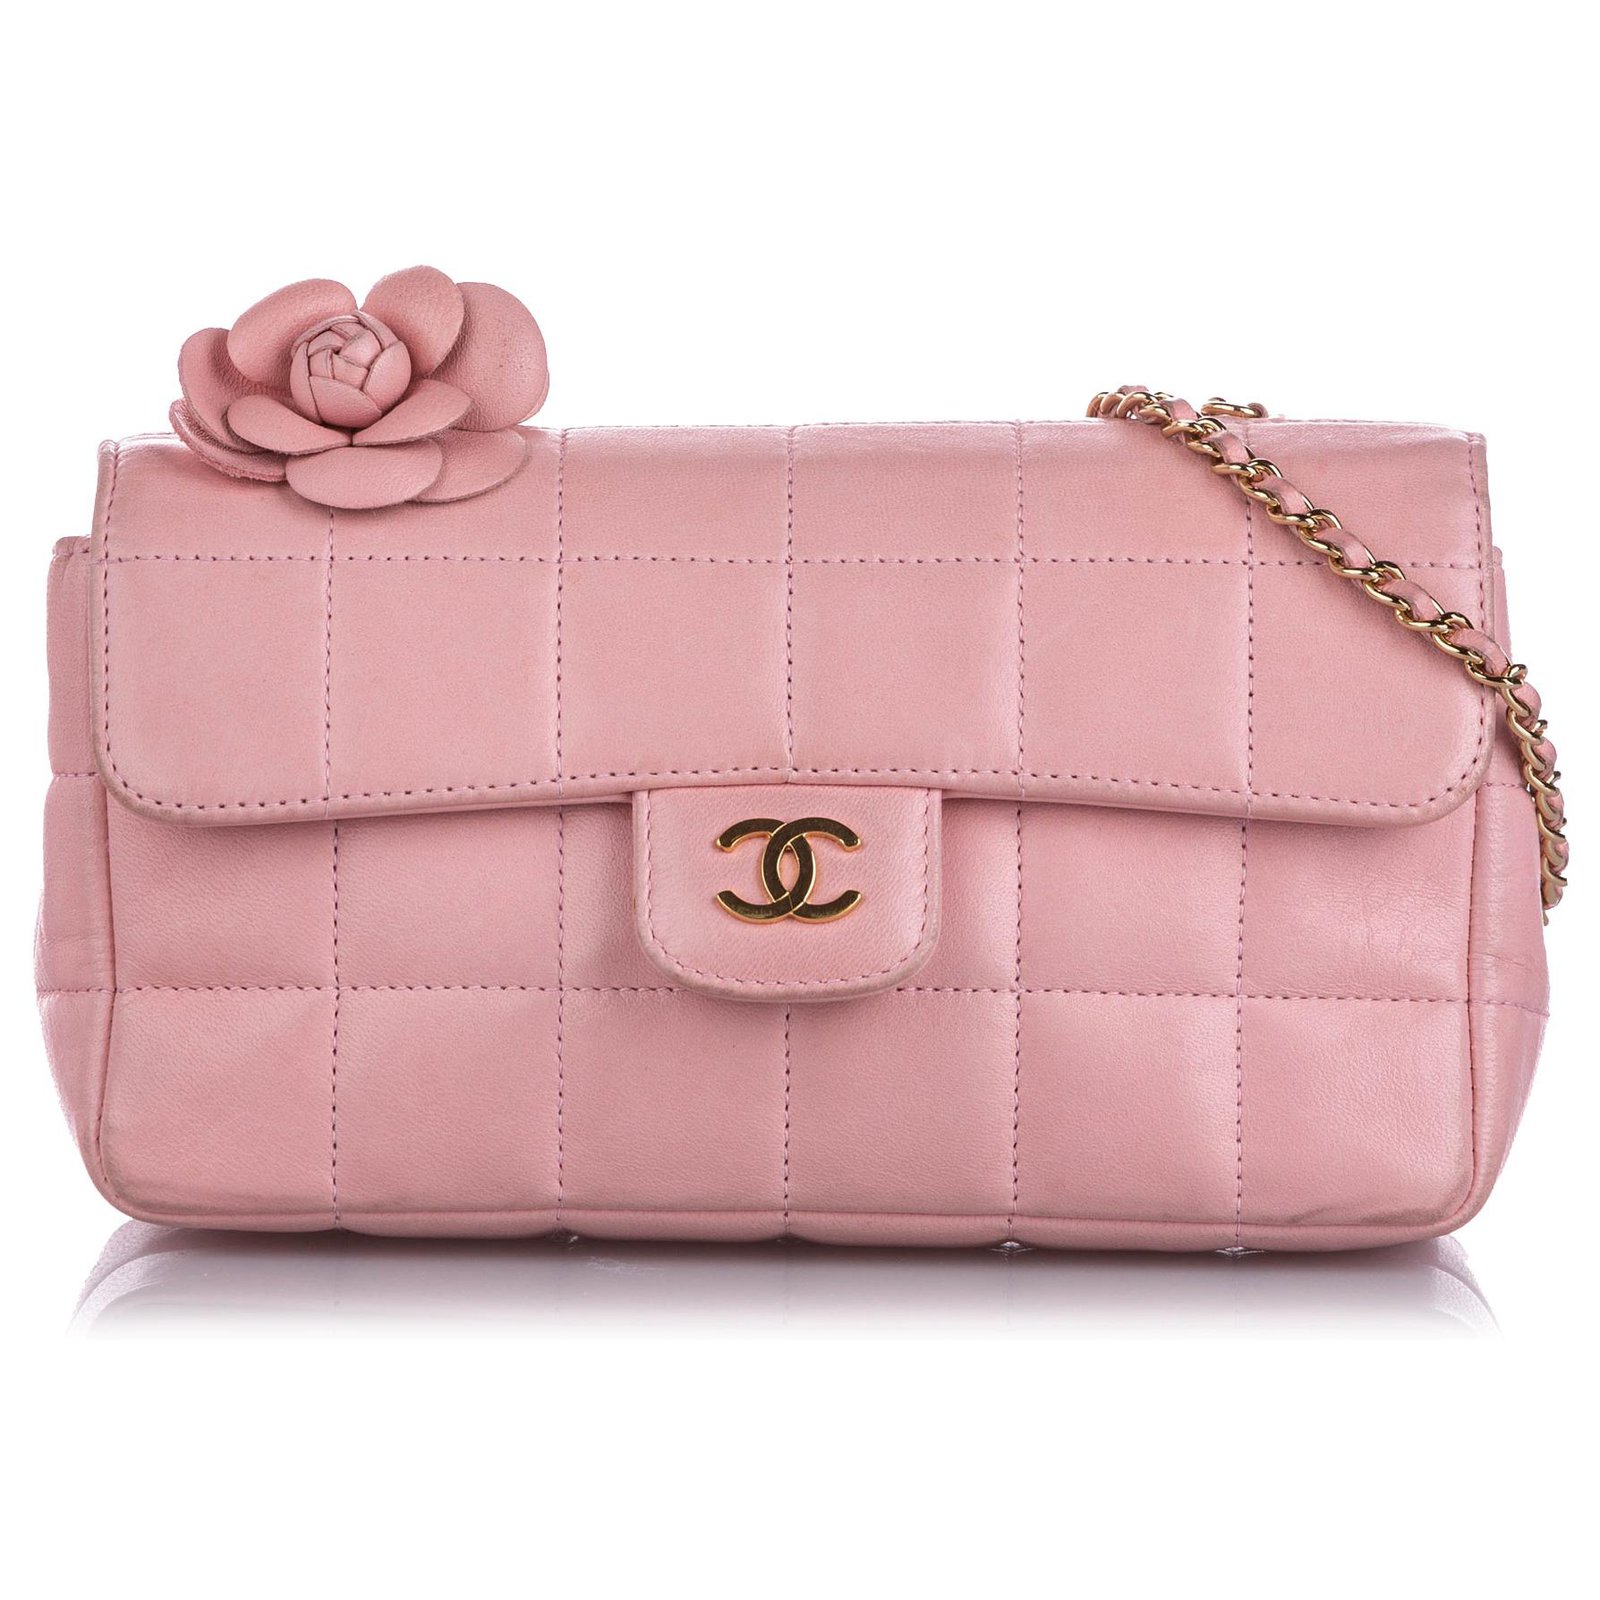 chanel bags 2021 price